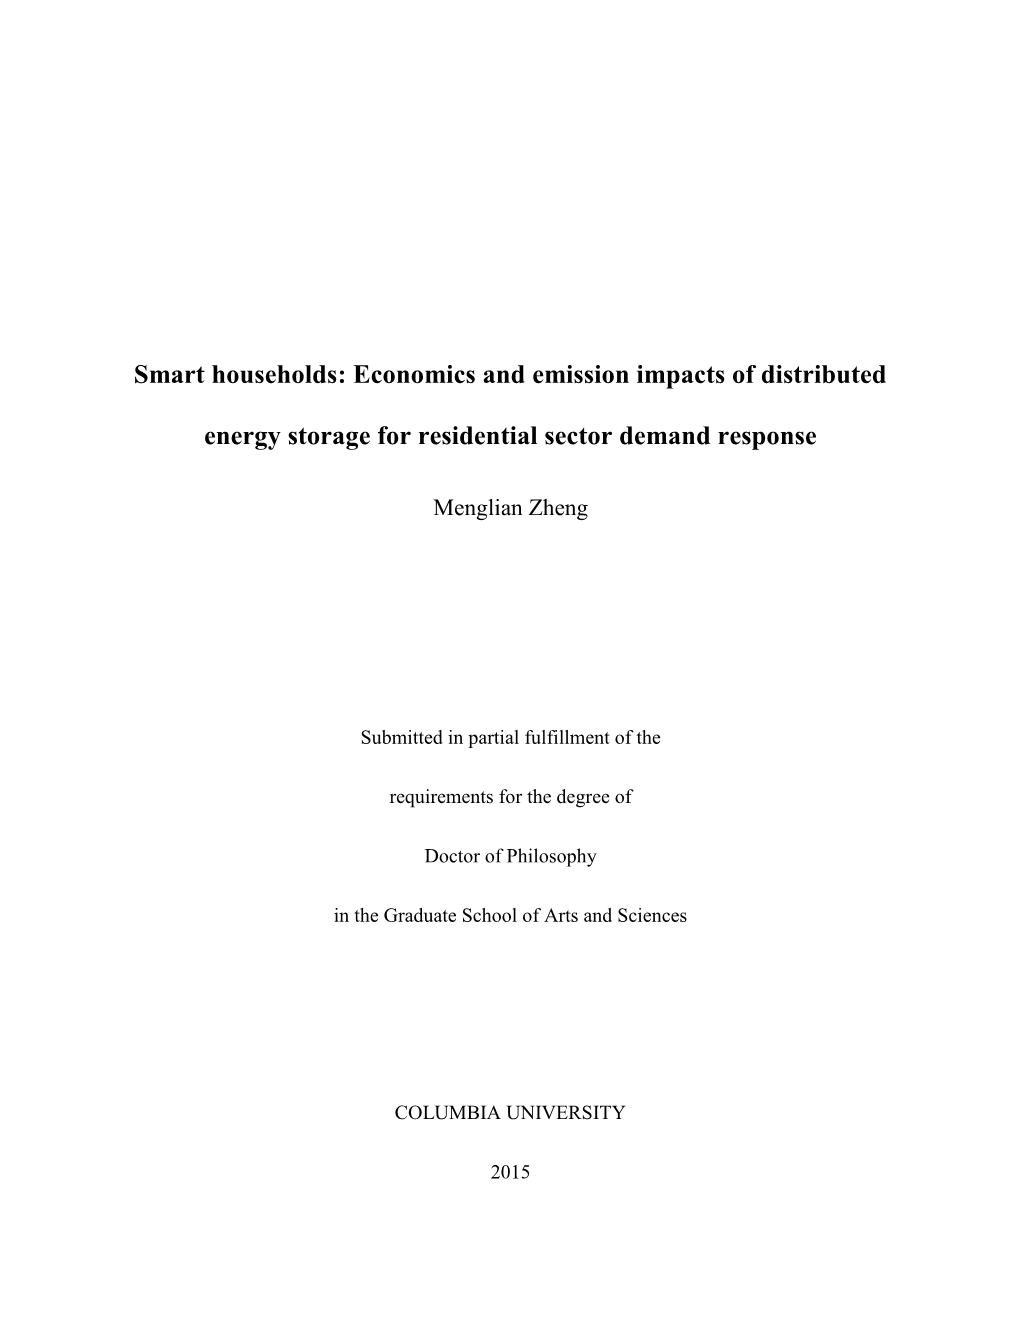 Economics and Emission Impacts of Distributed Energy Storage For